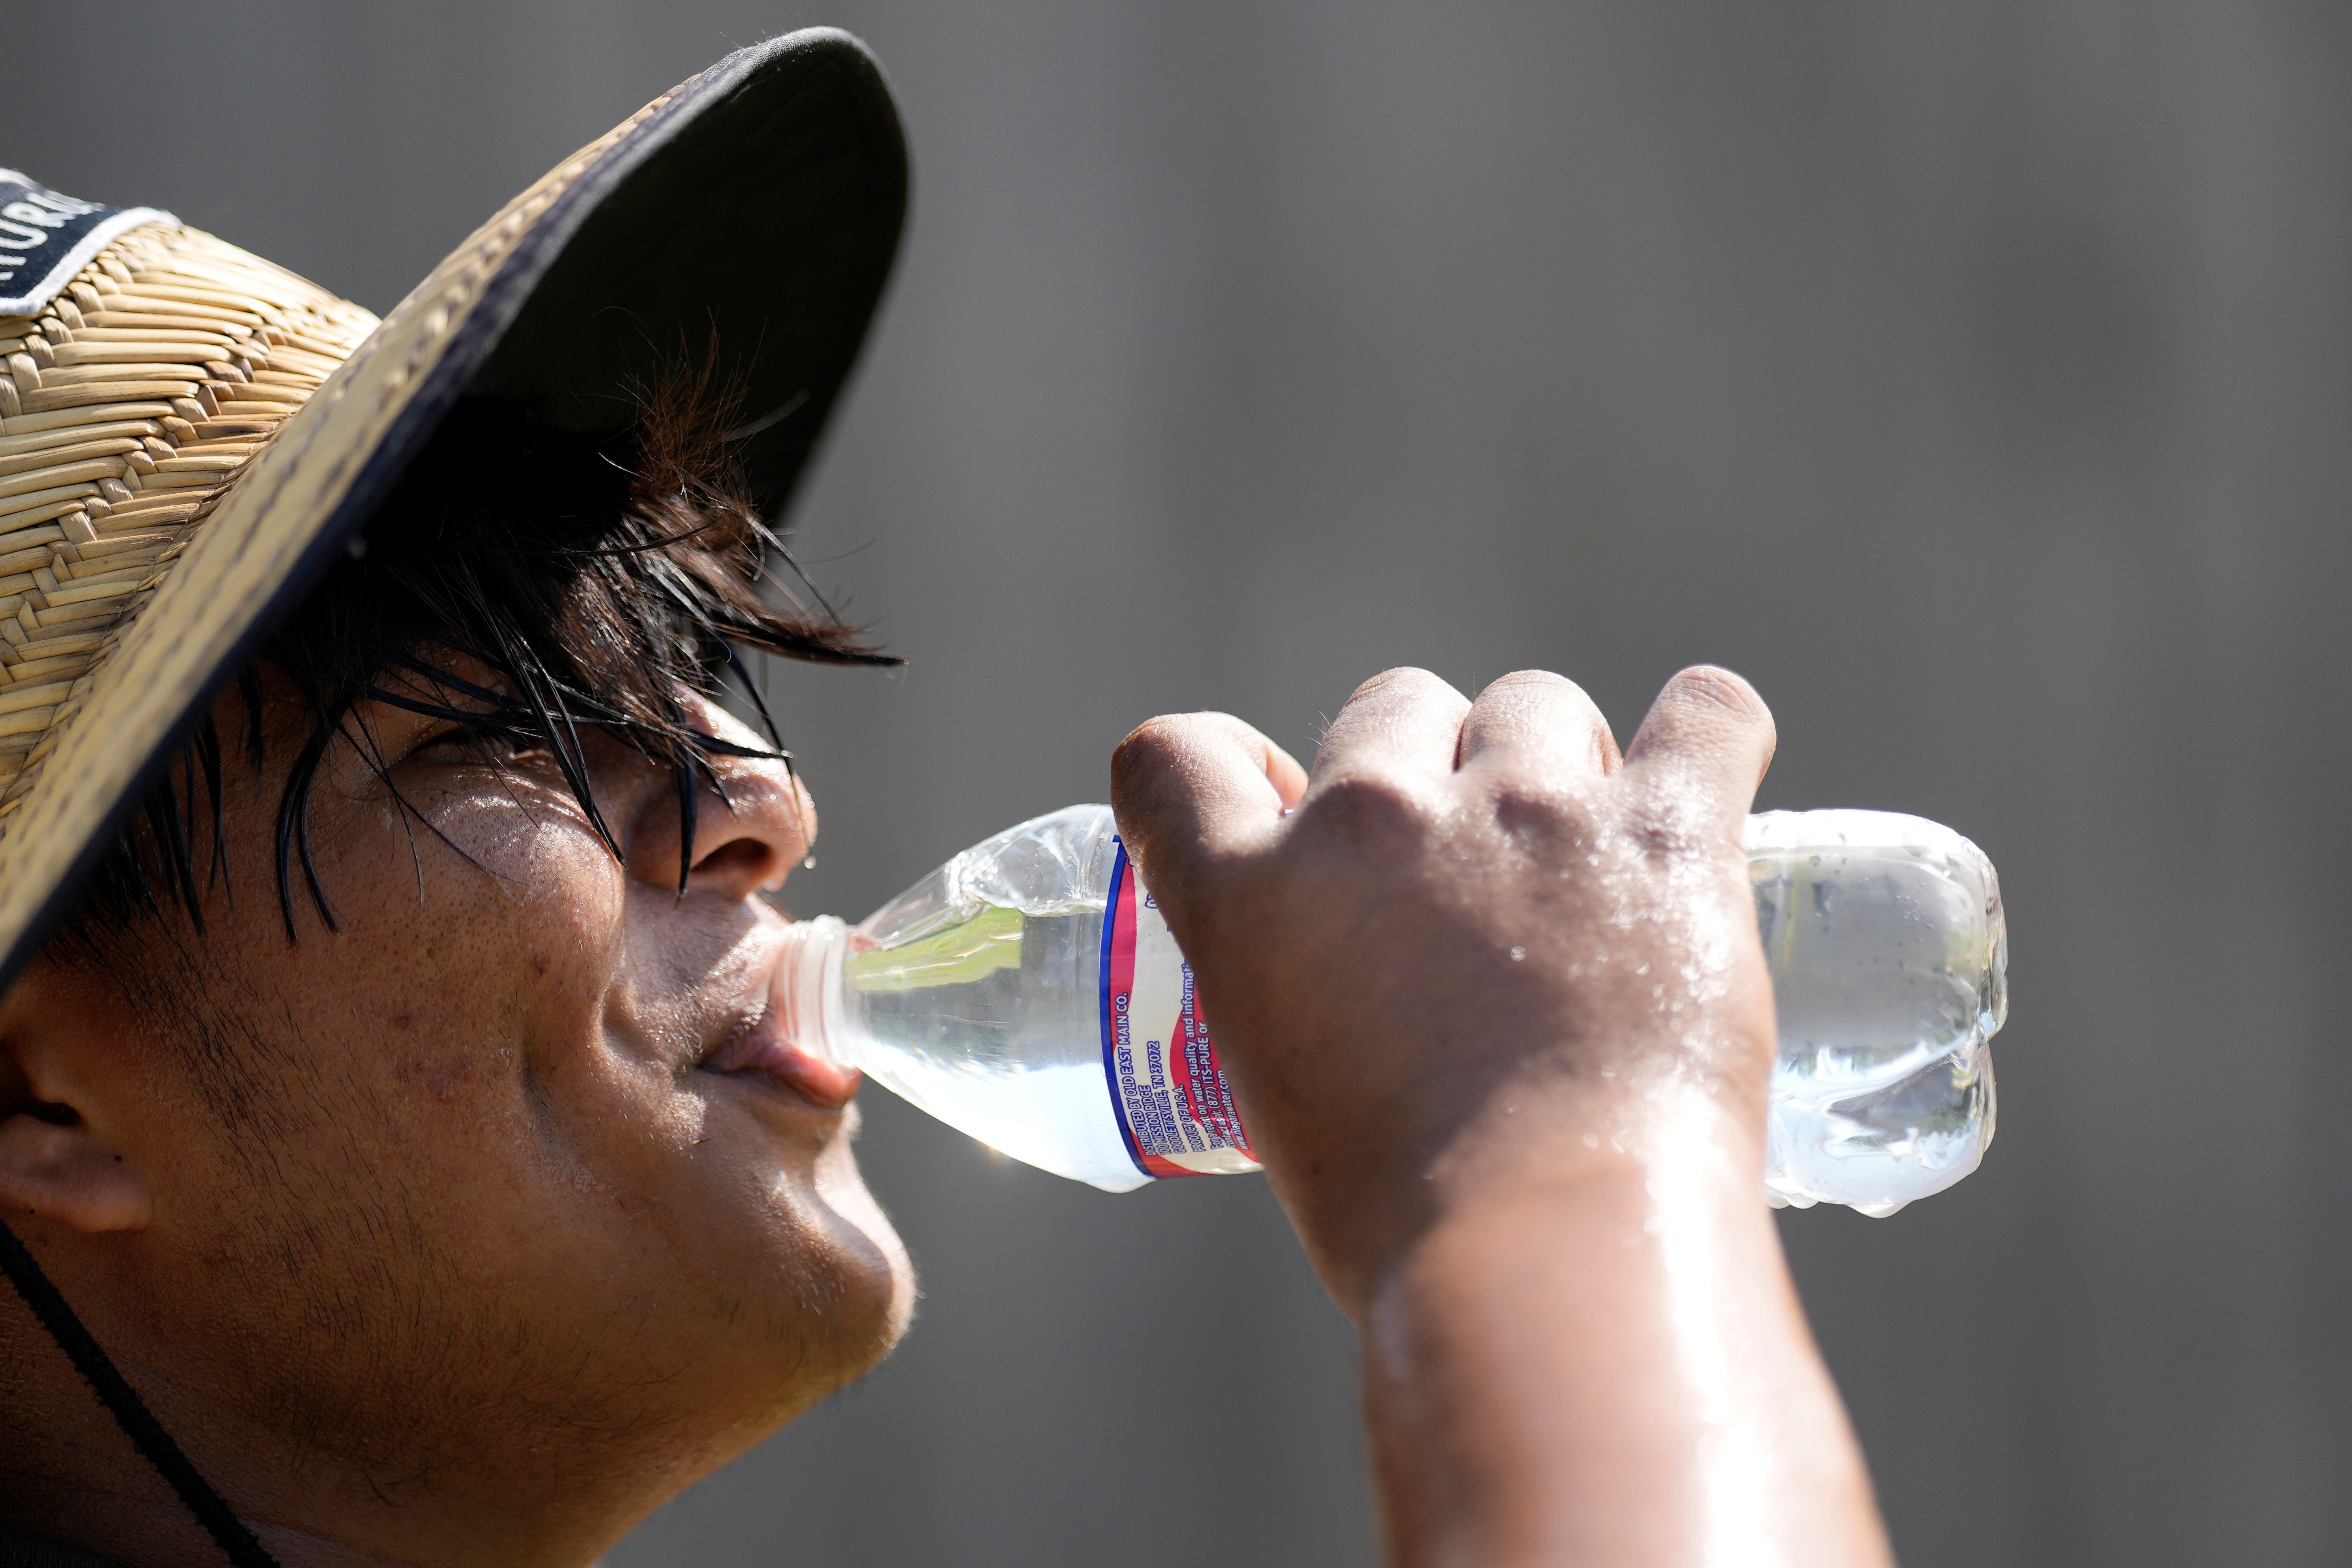 Carlos Rodriguez drinks water while taking a break from digging fence post holes in Houston in June